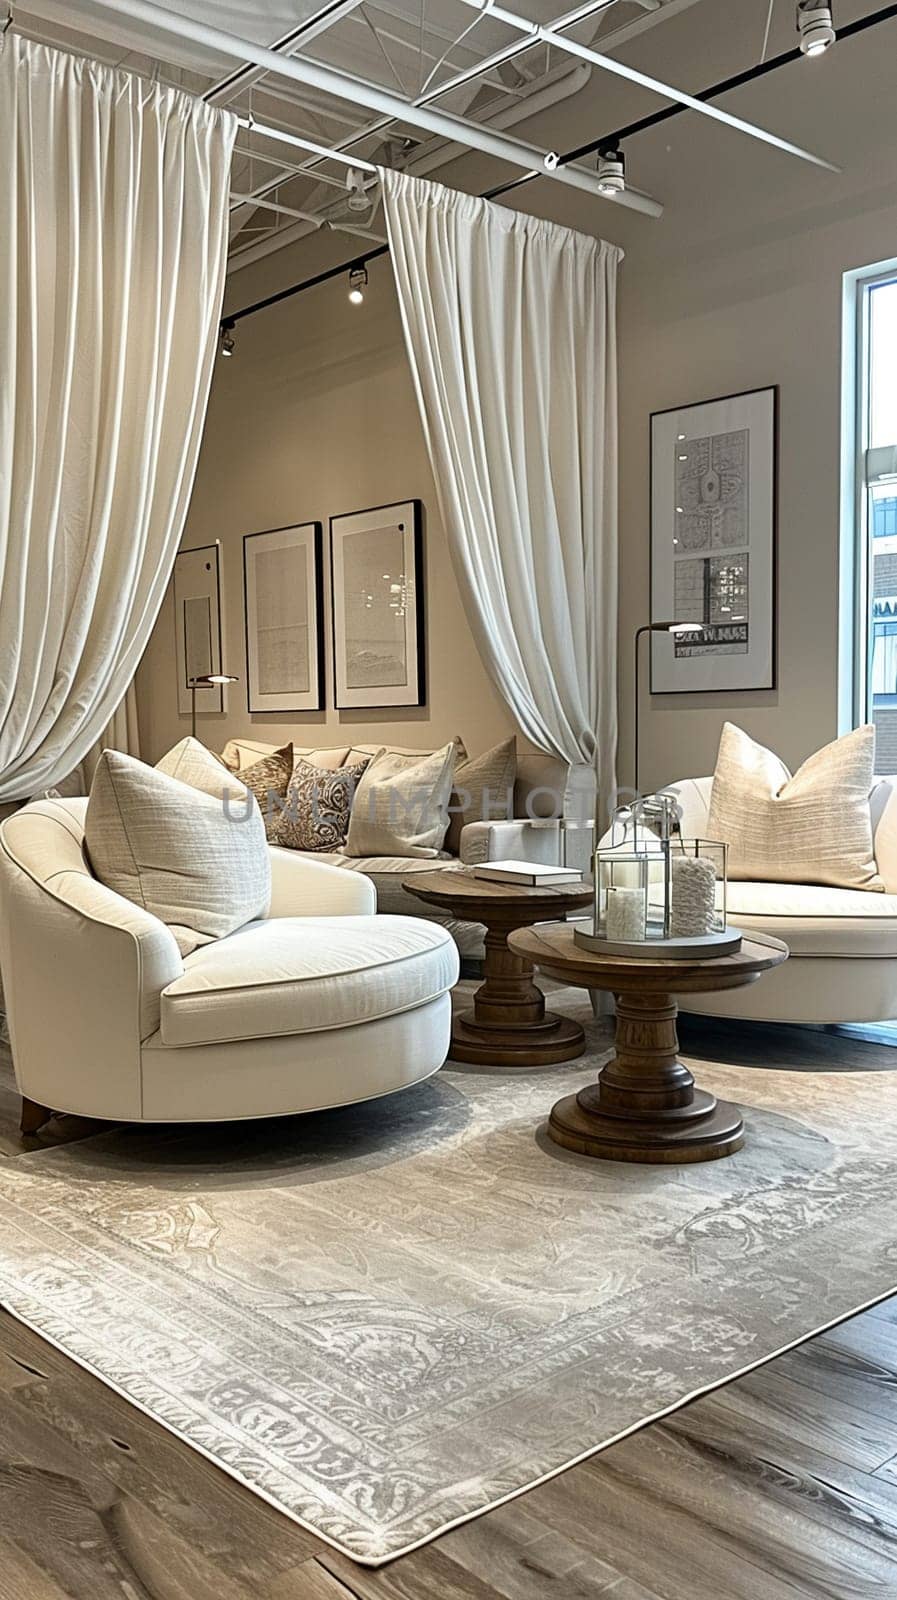 Home Design Showroom Inspires Renovation Ideas for Business Spaces, Couches and curtains illustrate the potential for transforming business environments.